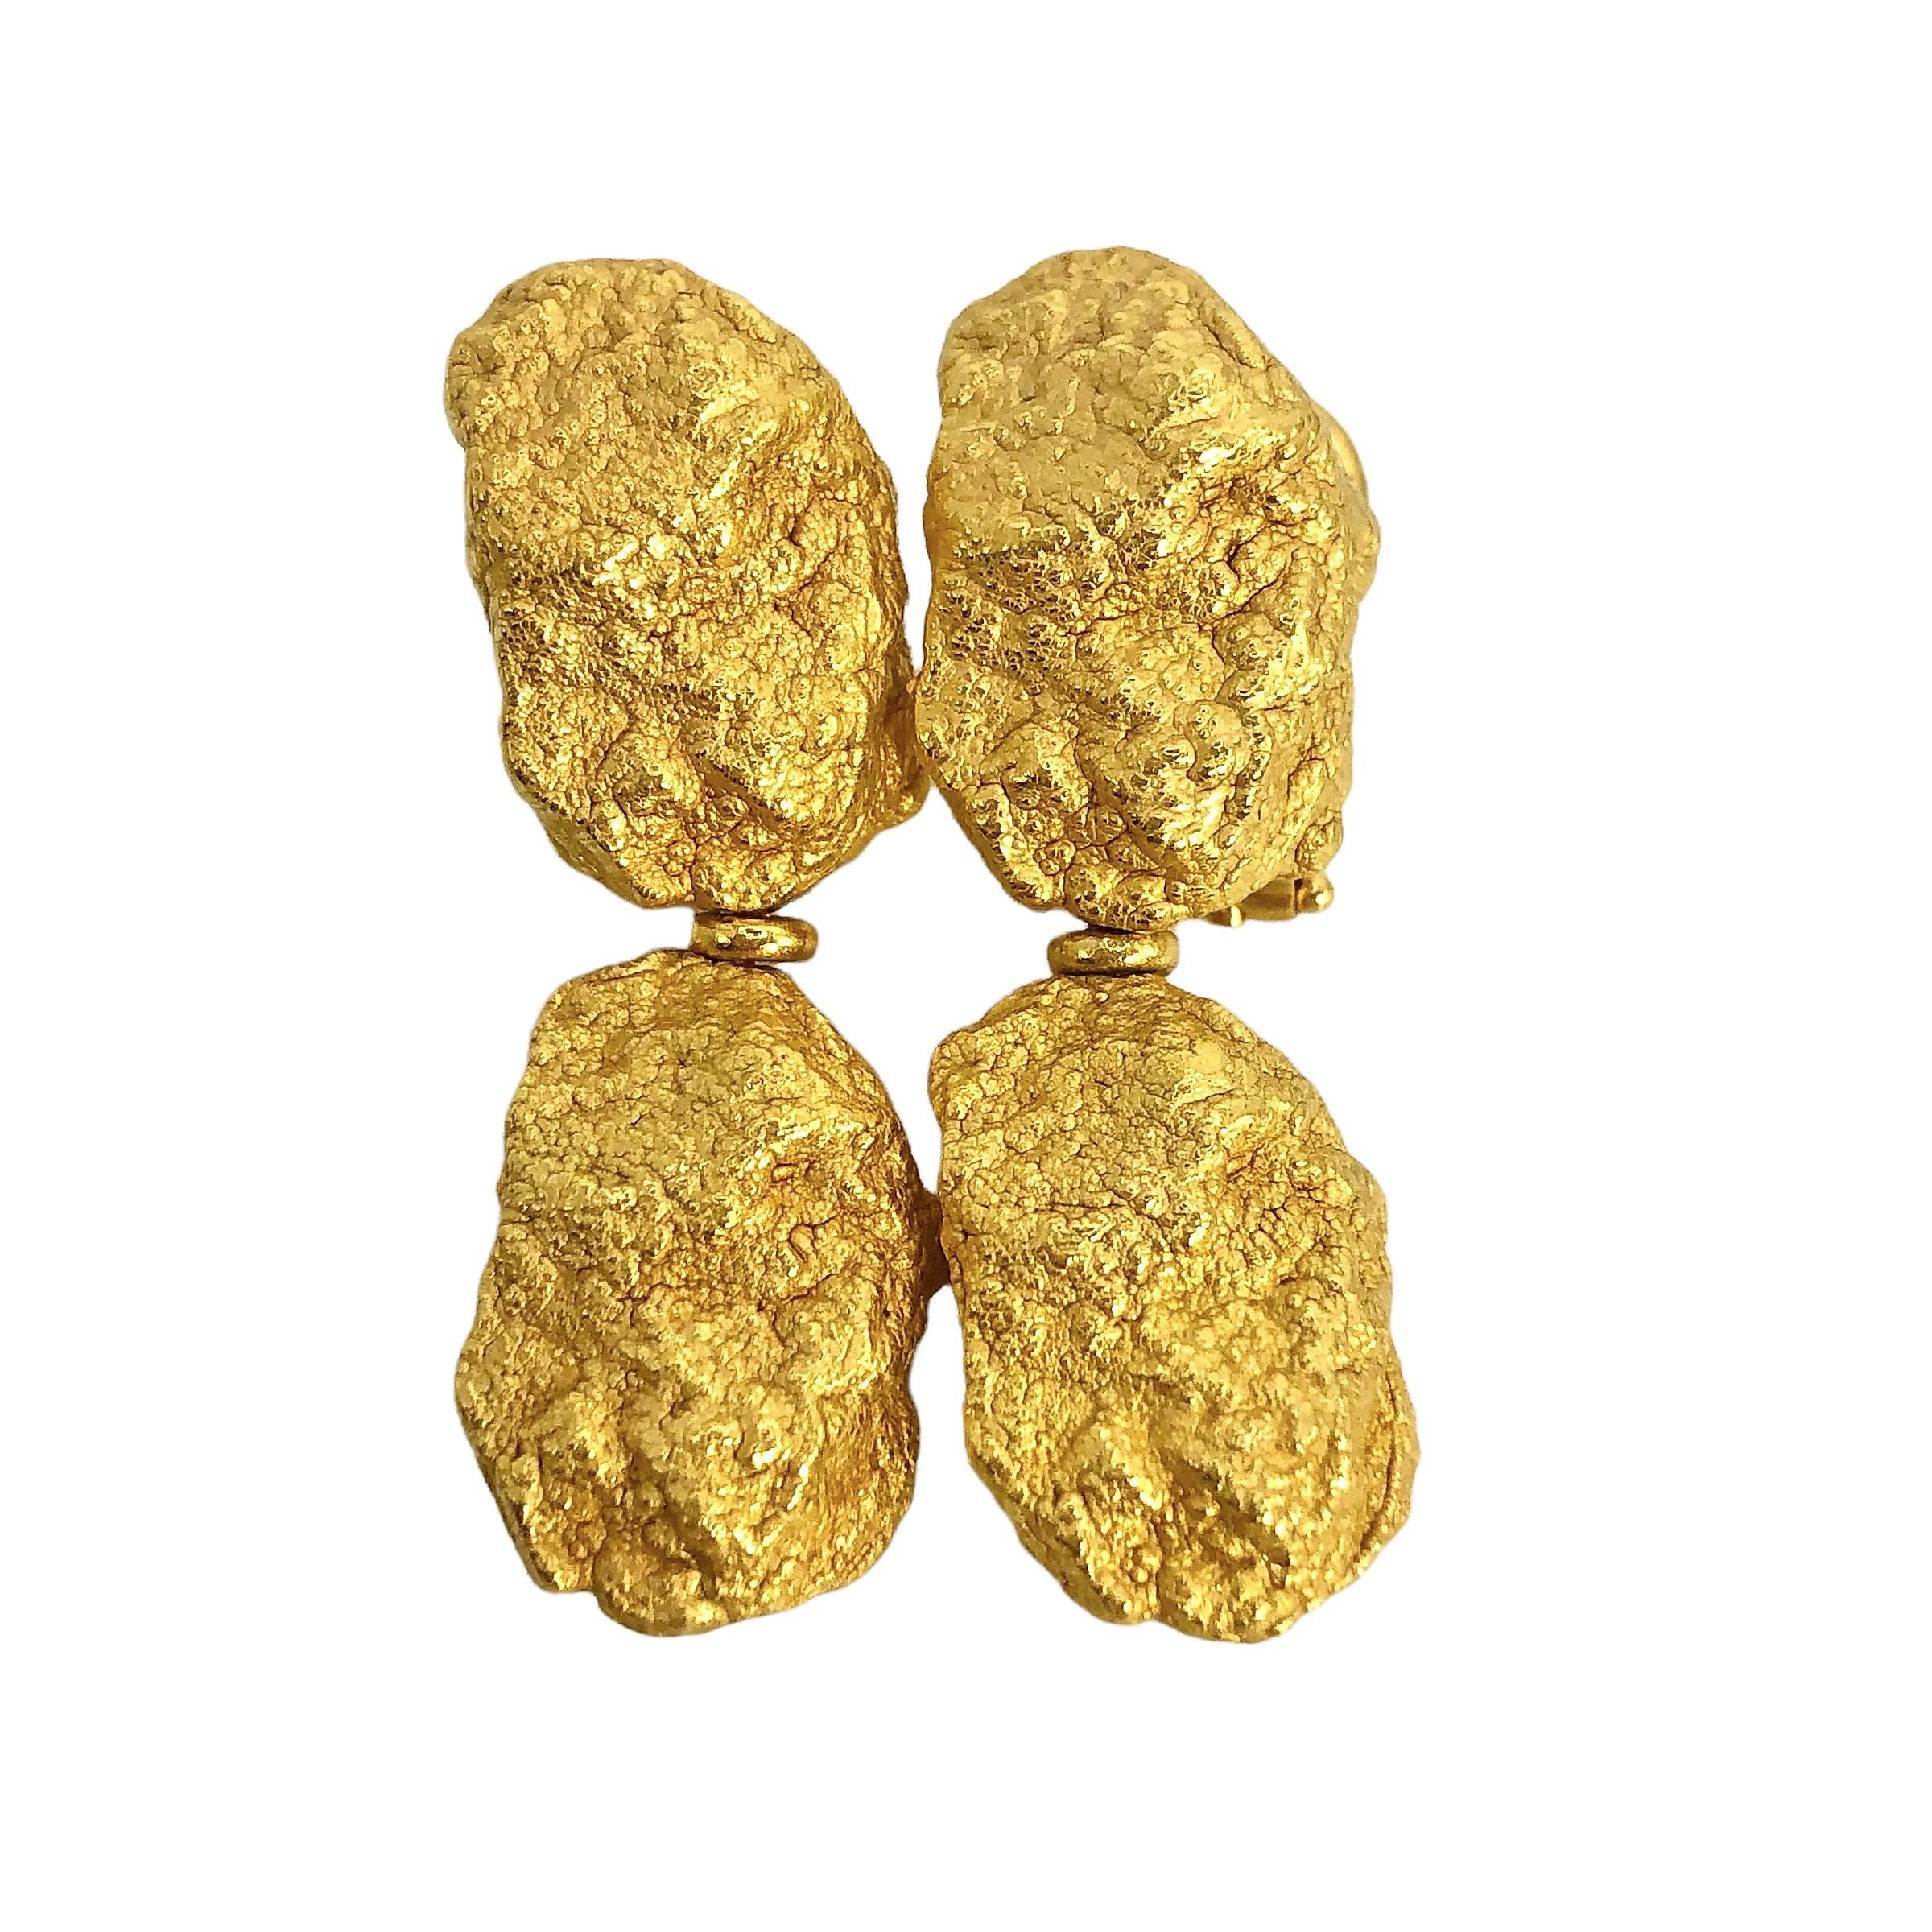 These chunky, Roberto Coin 18K yellow gold earrings depict the look of fine gold nuggets, extracted right from the gold mine. The earrings have a pure 24k gold wash, applied in the makers workshop, which completes the illusion that these are real